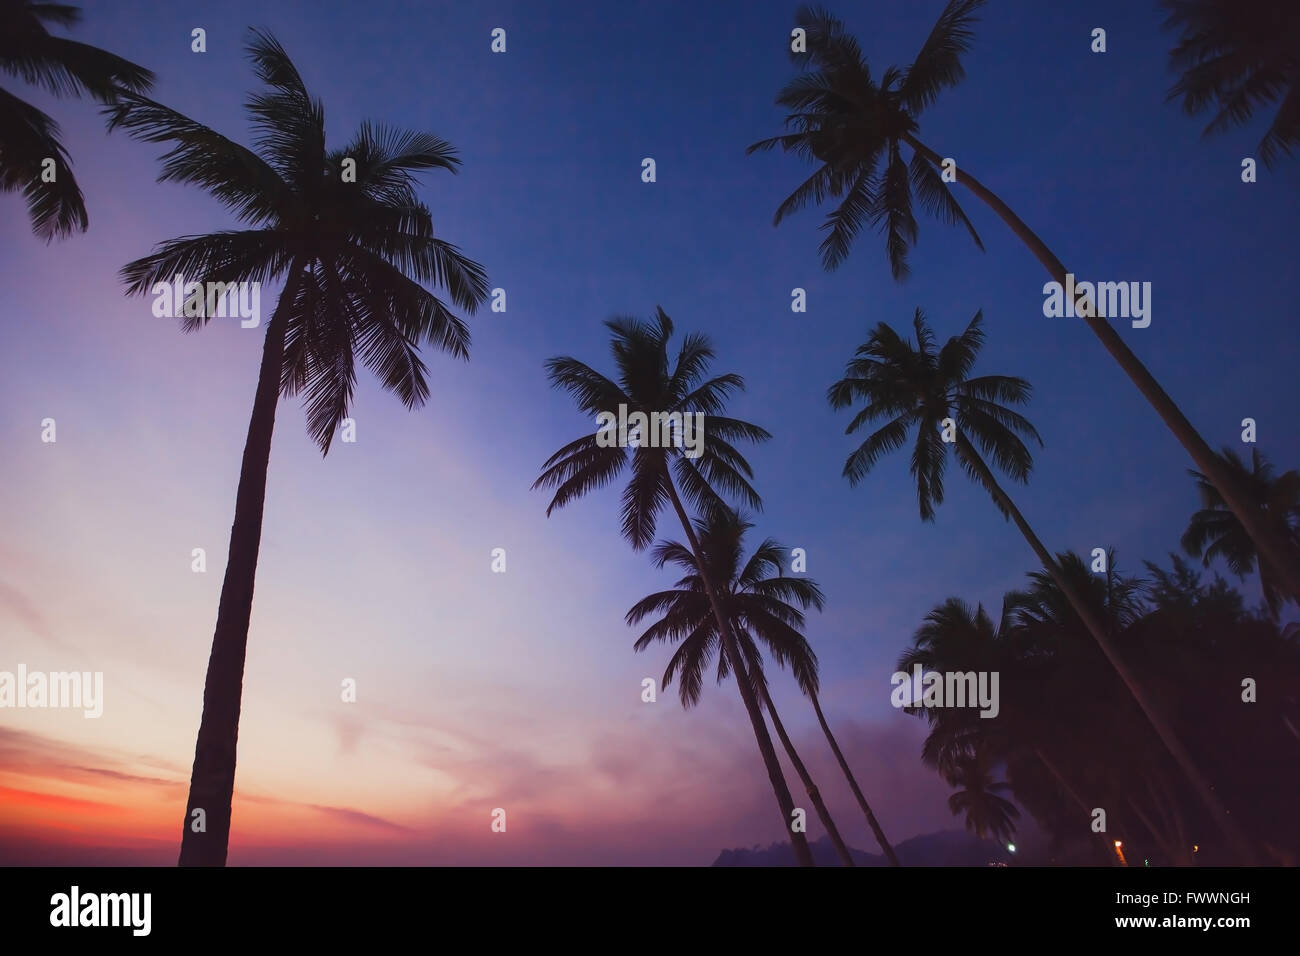 tropical landscape by night, silhouettes of palm trees on the beach with sunset sky Stock Photo